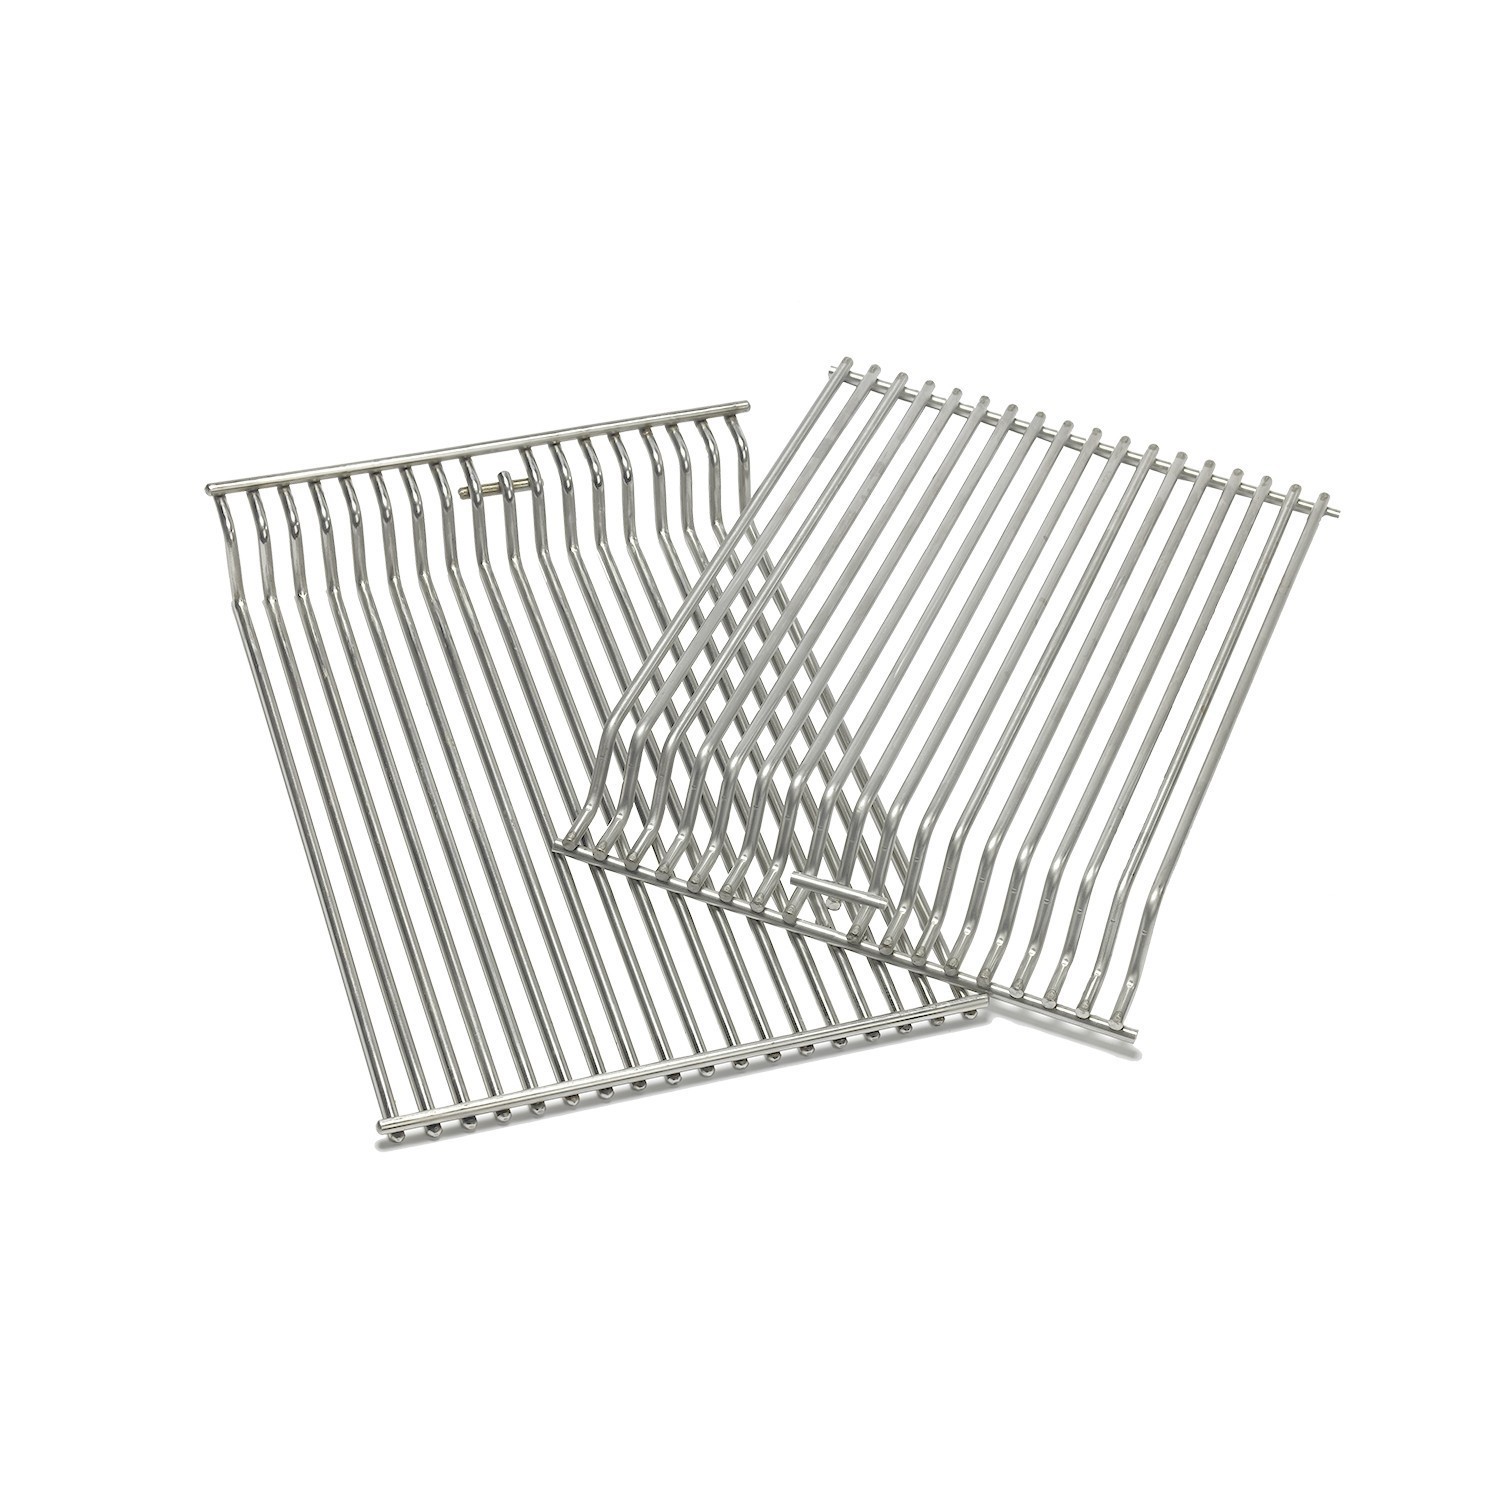 BROILMASTER DPA111 STAINLESS STEEL ROD MULTI-LEVEL COOKING GRIDS FOR SIZE 3 GRILL - SET OF 2